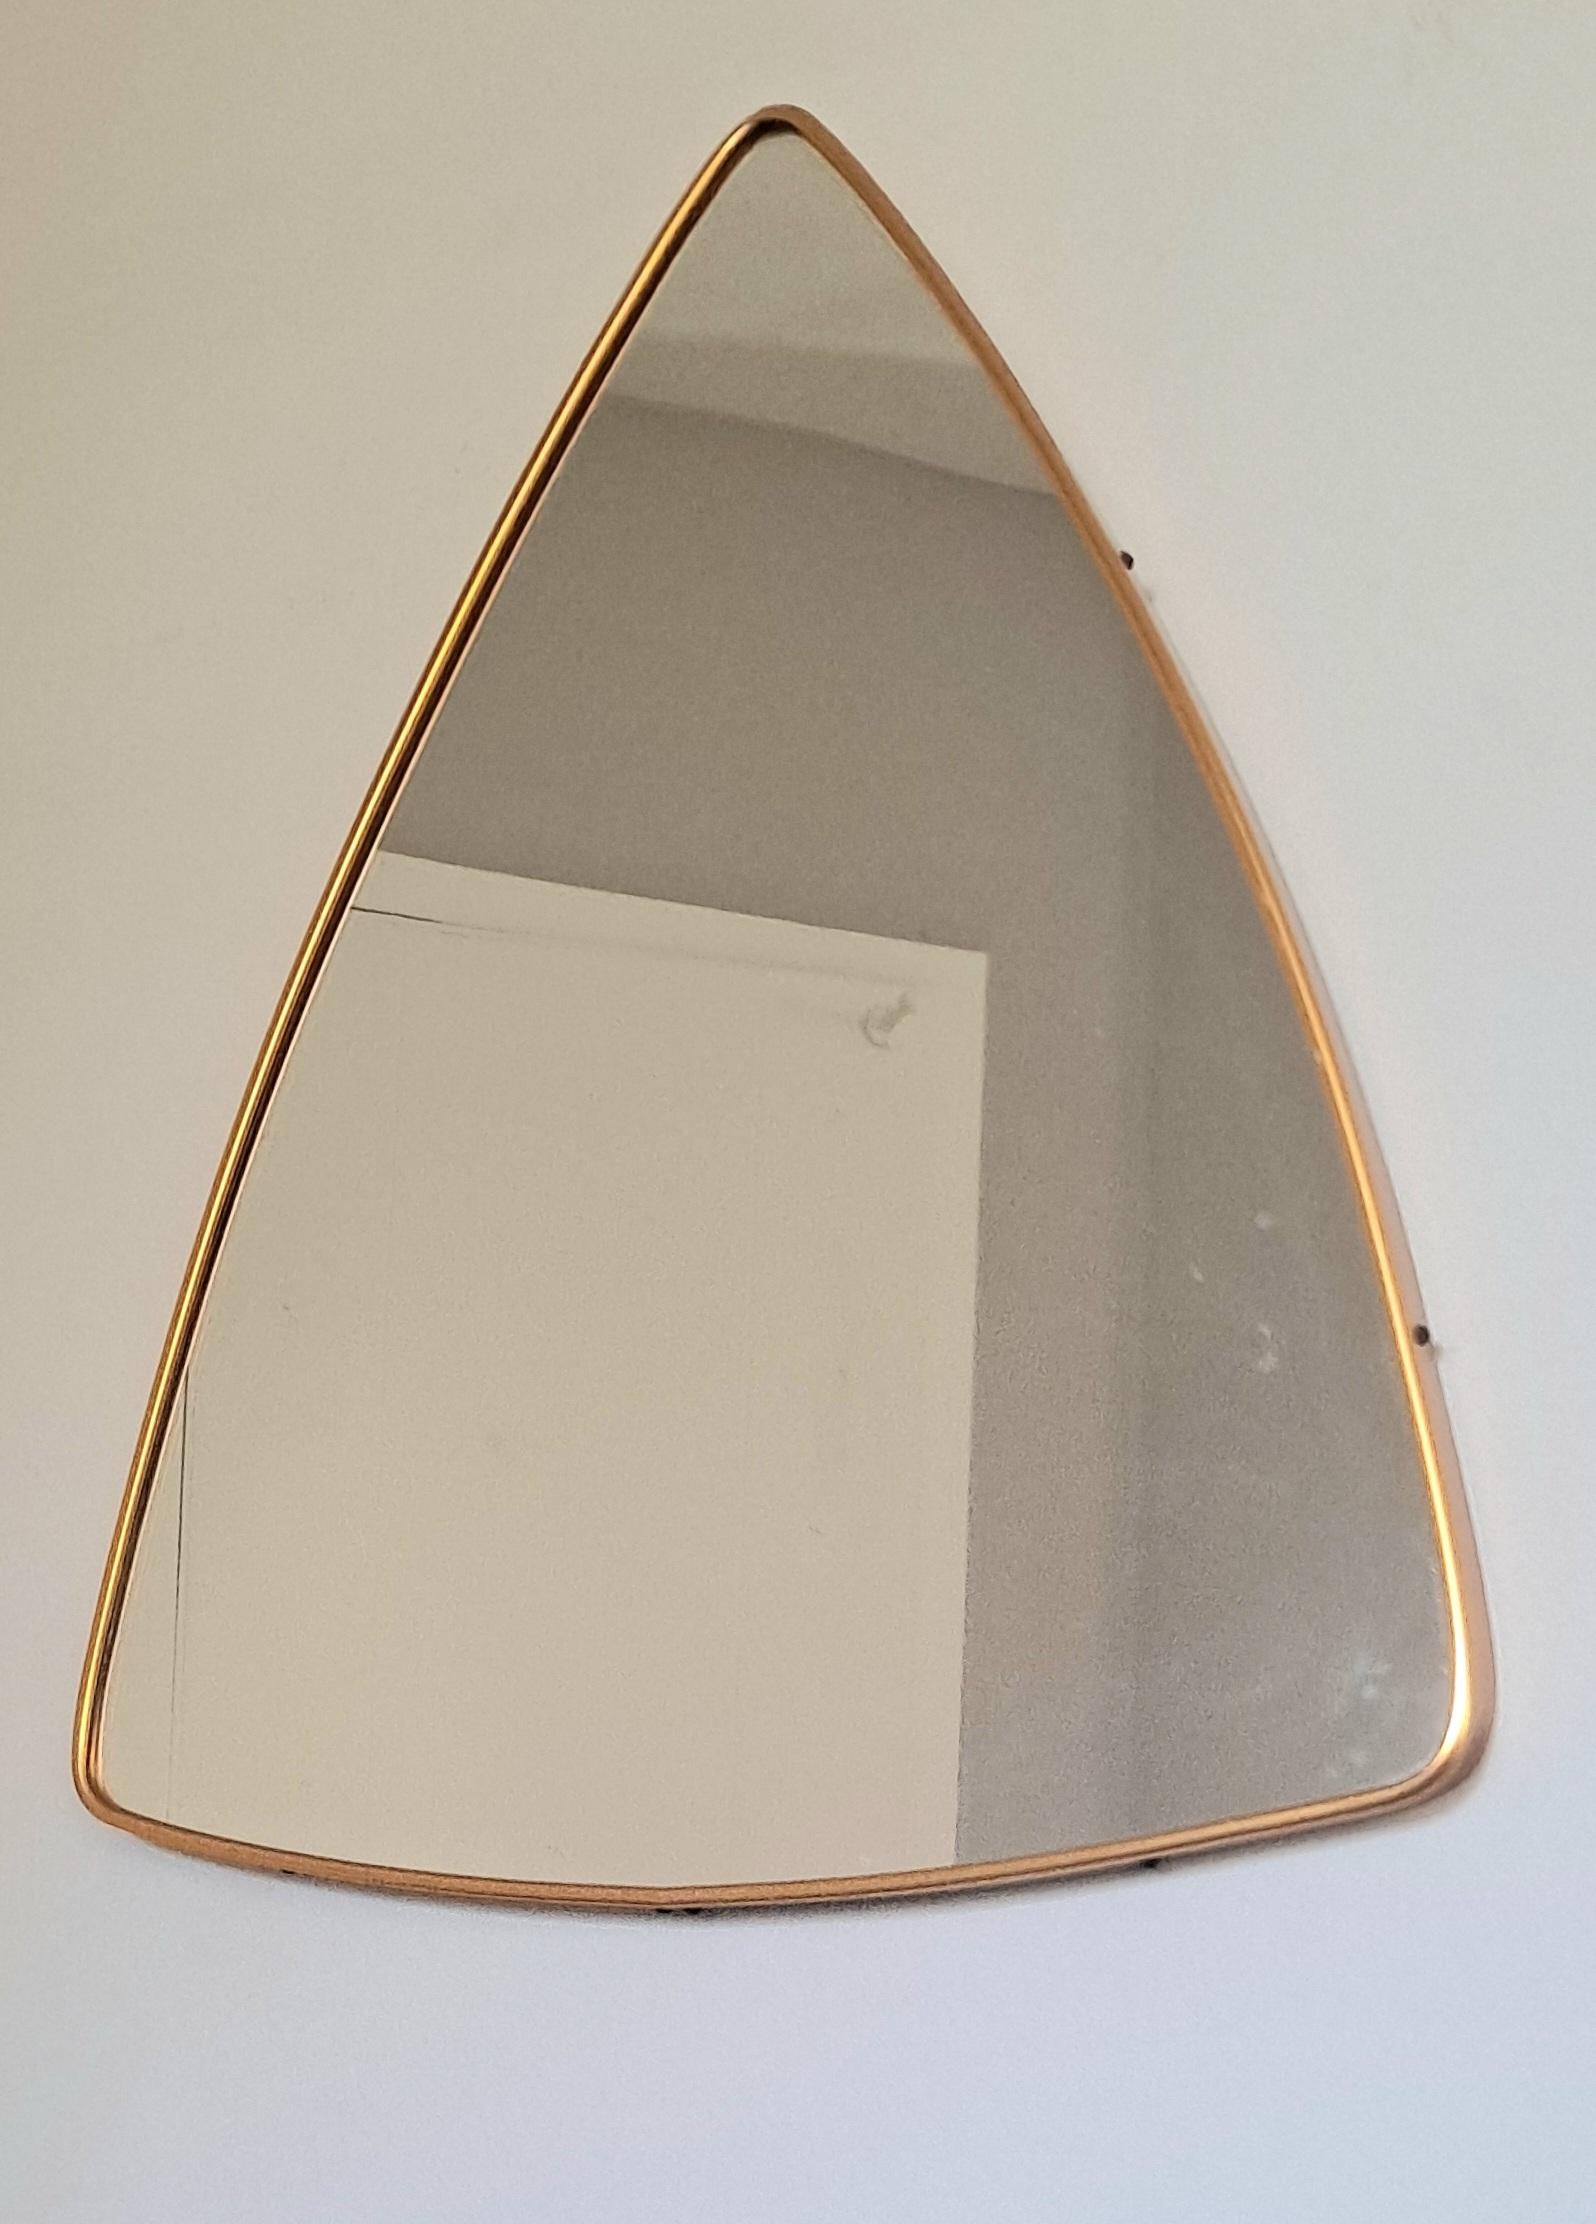 Aluminum base triangle wall mirror. Frame is Brass color.